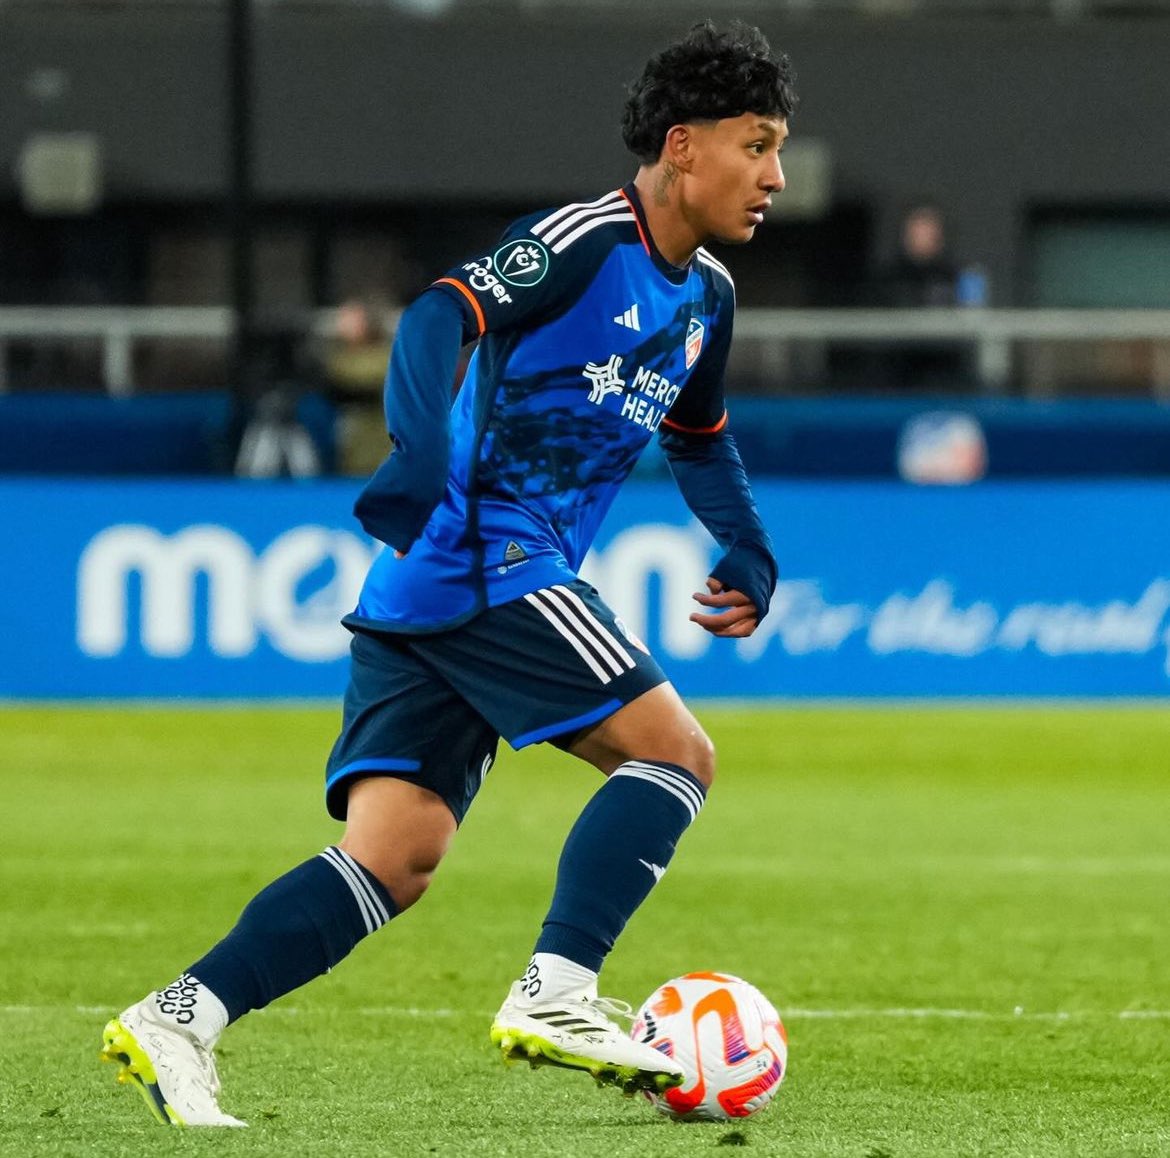 16 year old @Stivenjimez makes his first start of 2024 with @FCCincinnati2 tonight in @MLSNEXTPRO play 👏 Stiven has already made appearances for @fccincinnati in @MLS and @TheChampions this year - setting the record for the youngest player to appear in the Champs Cup 🤩